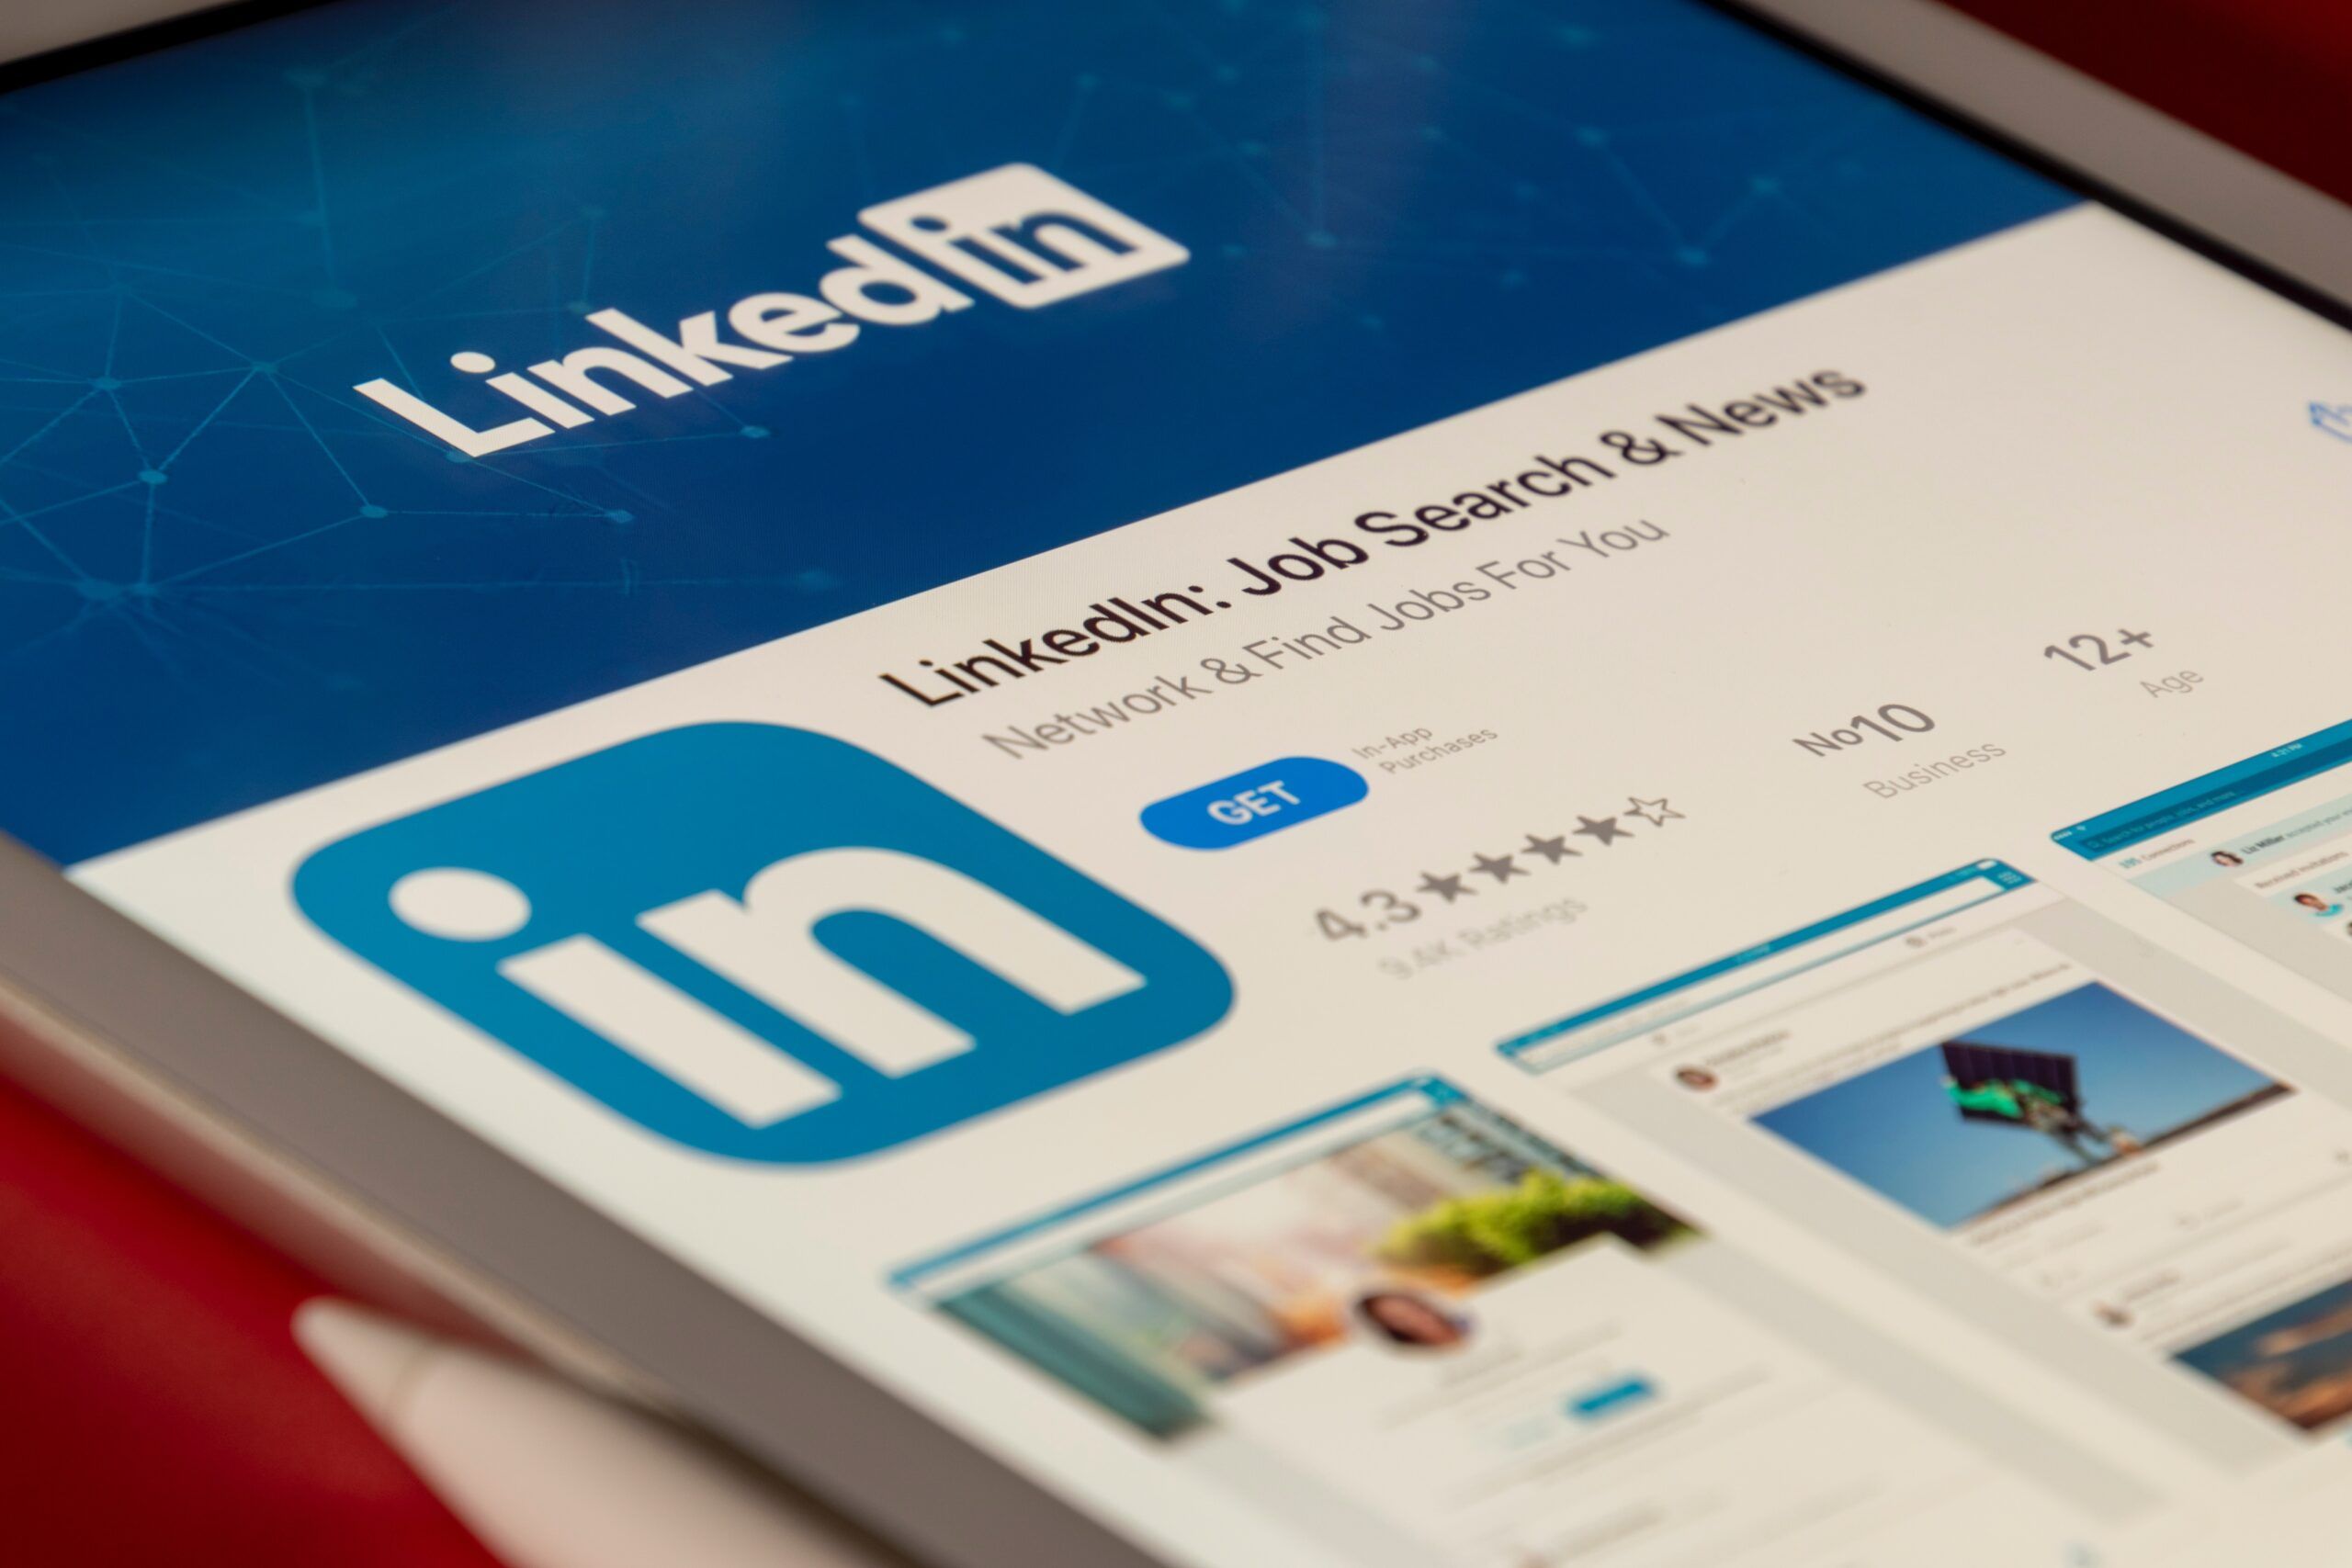 Linkedin: How to optimize your profile?